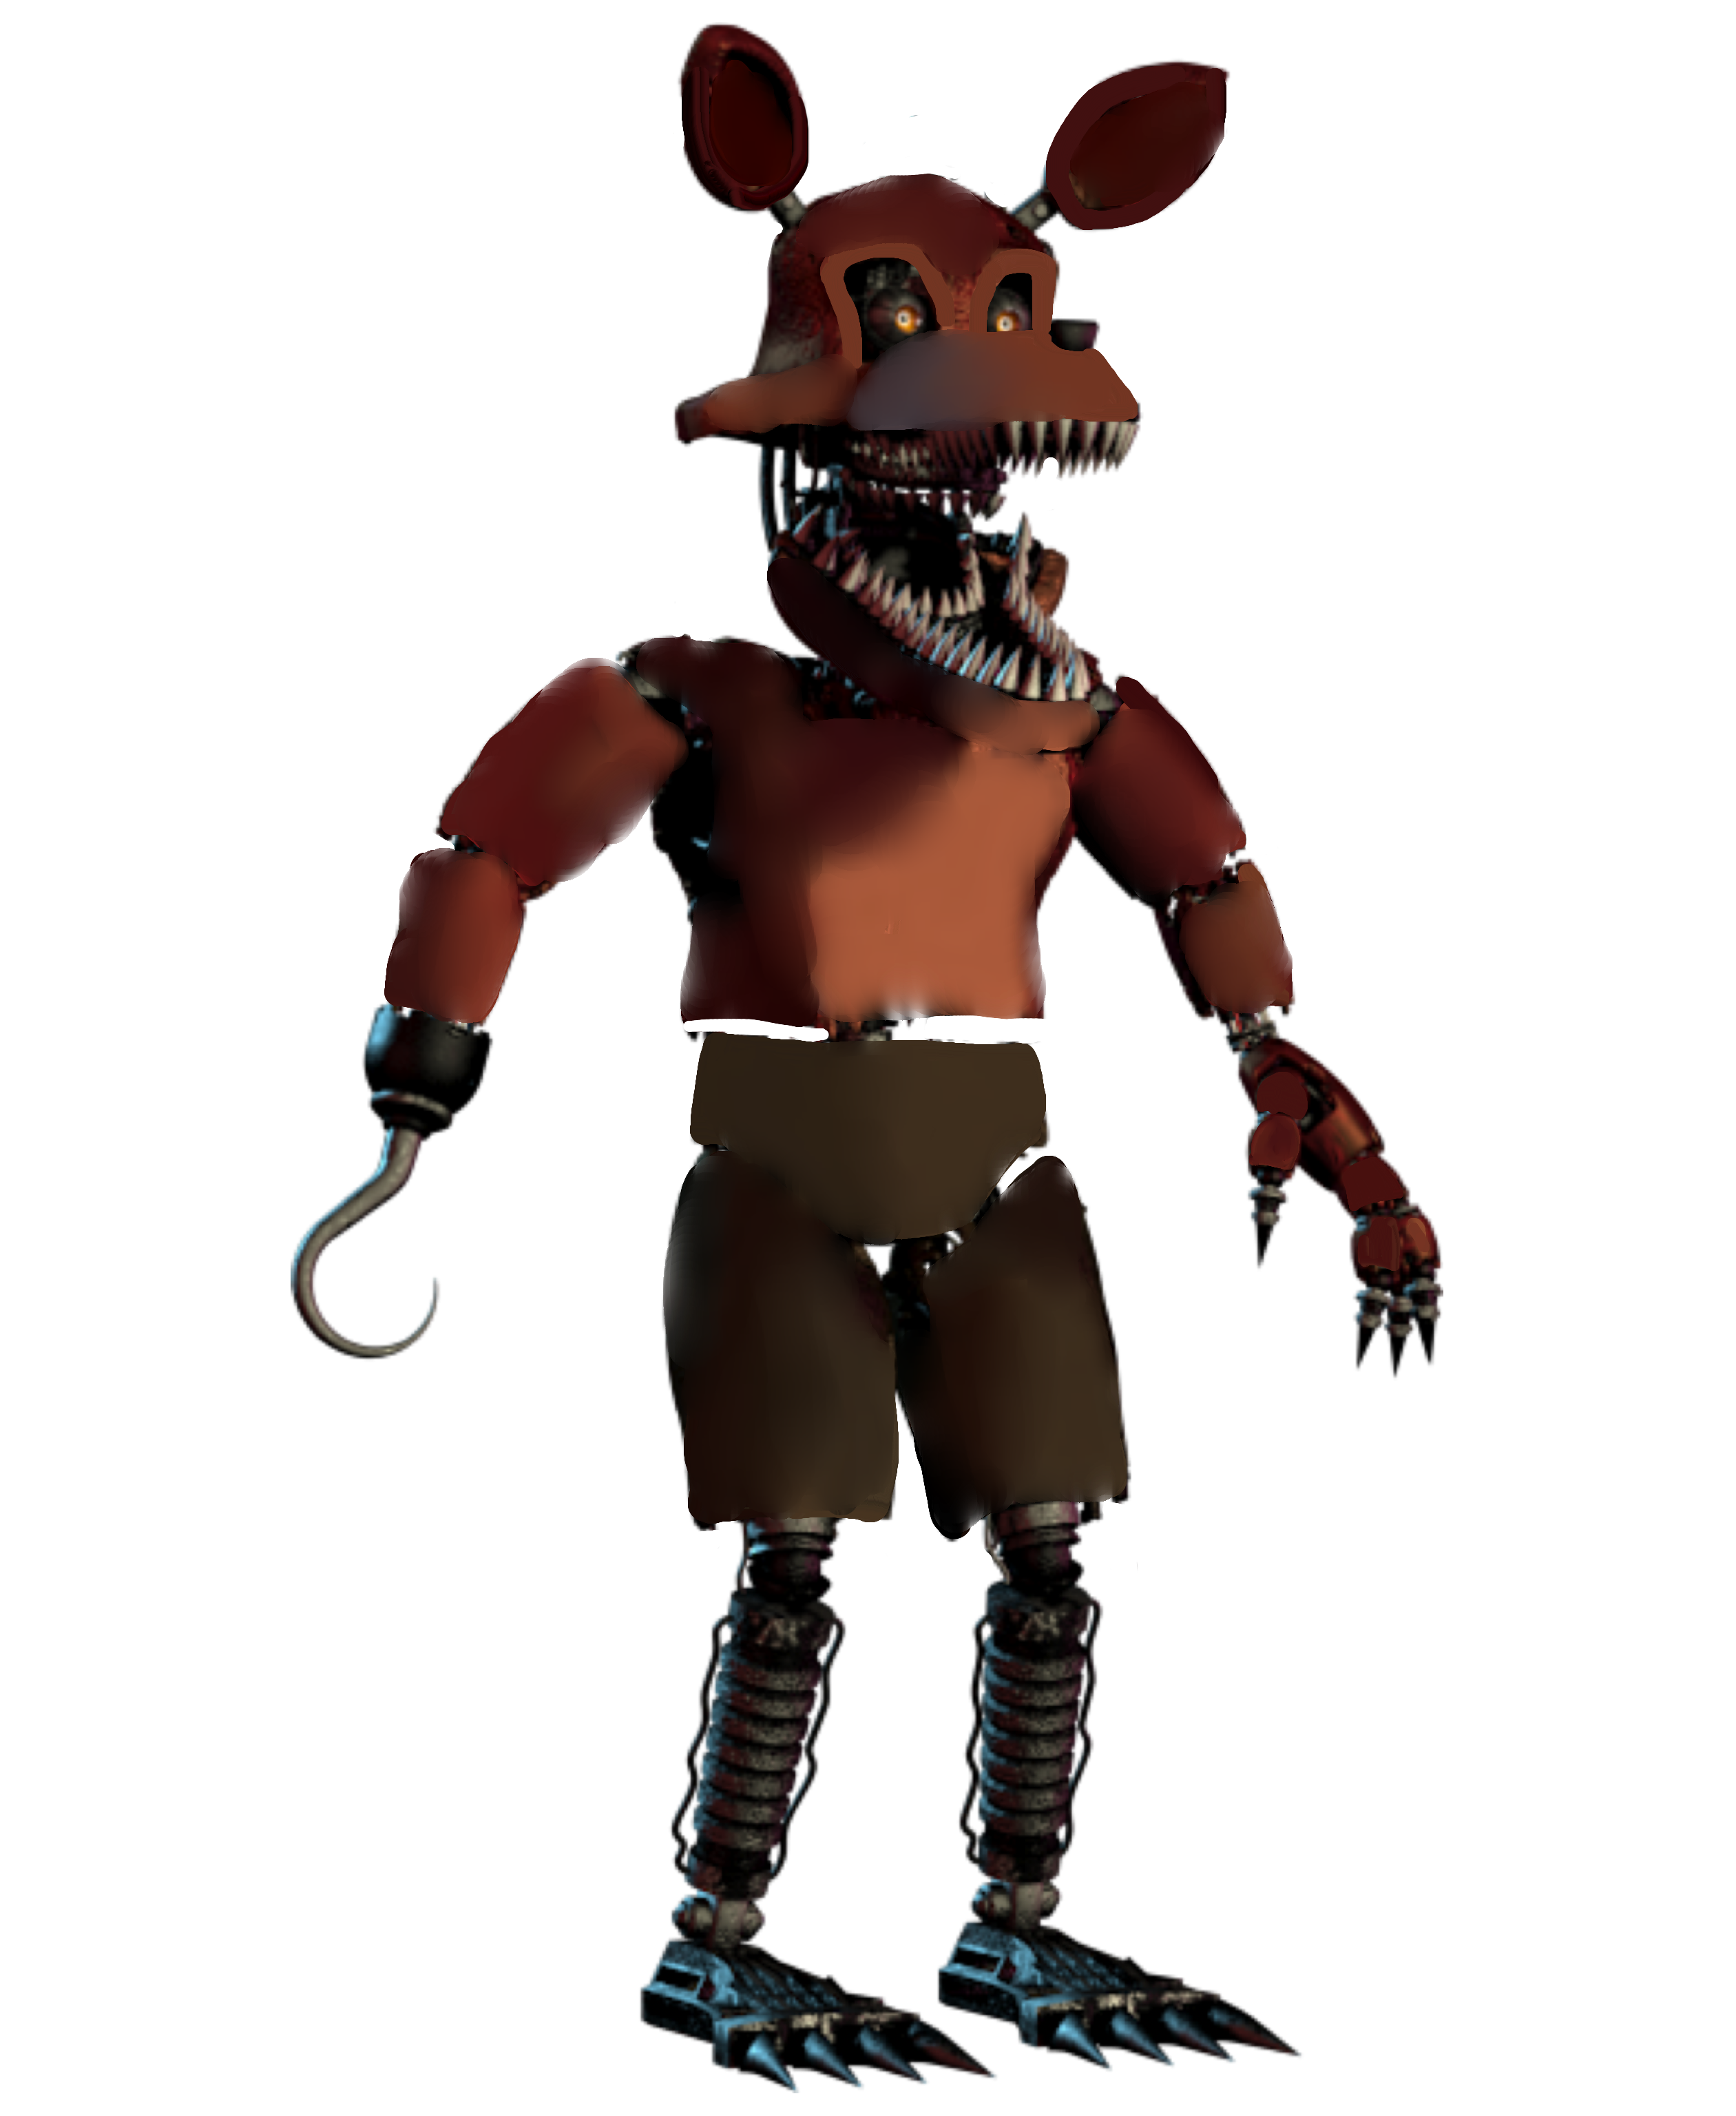 Fixed Nightmare Foxy By Thefnafeditingmaster On Deviantart